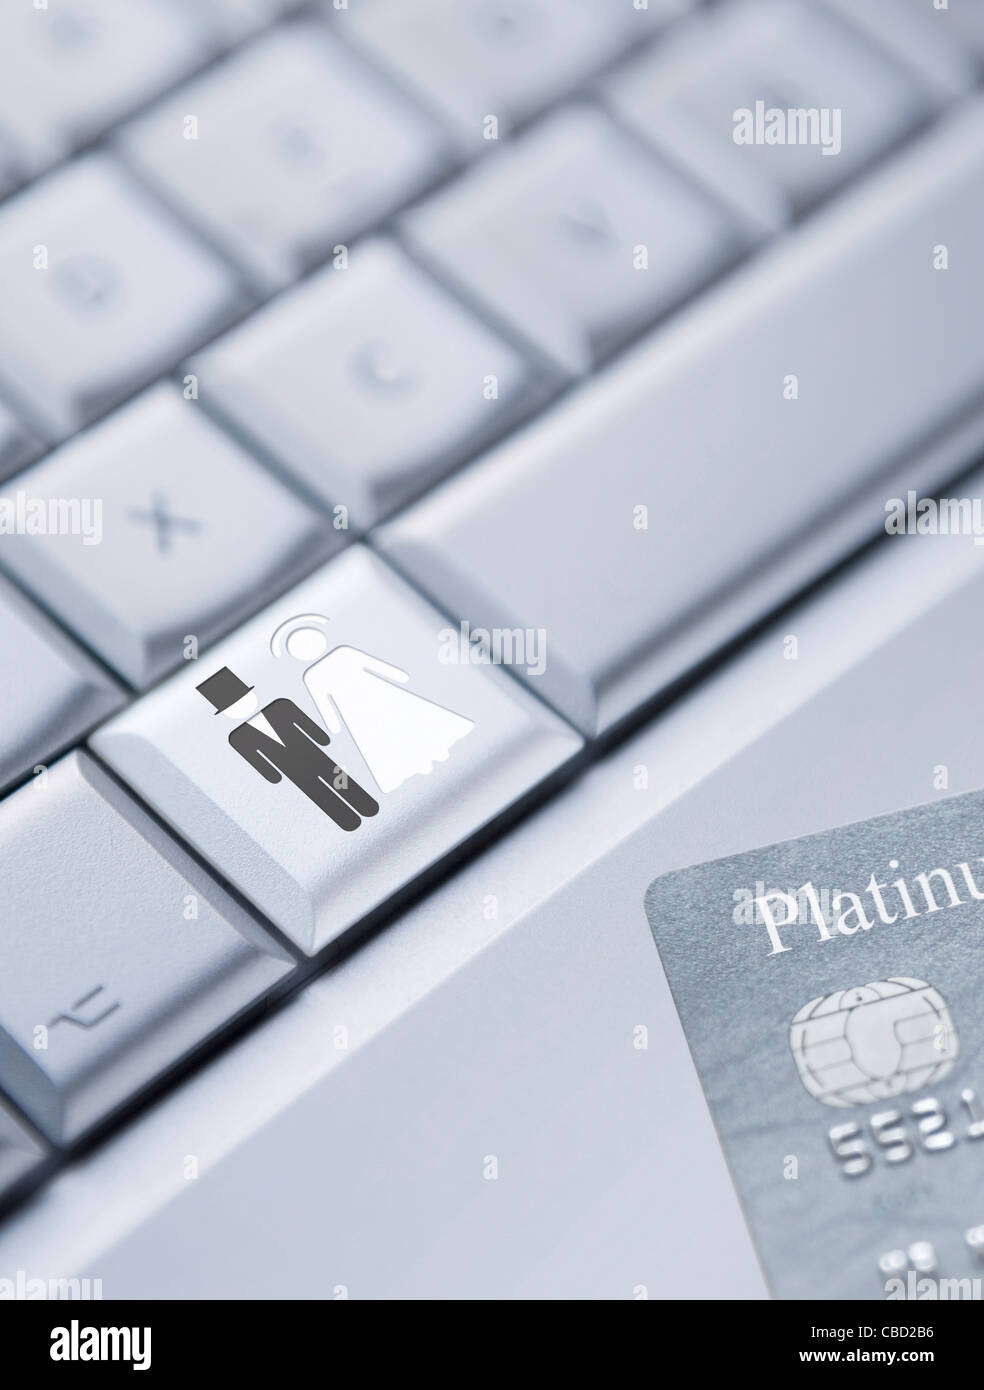 Detail of a laptop keyboard with a bride and groom symbol on one key and a credit card at the bottom right corner Stock Photo